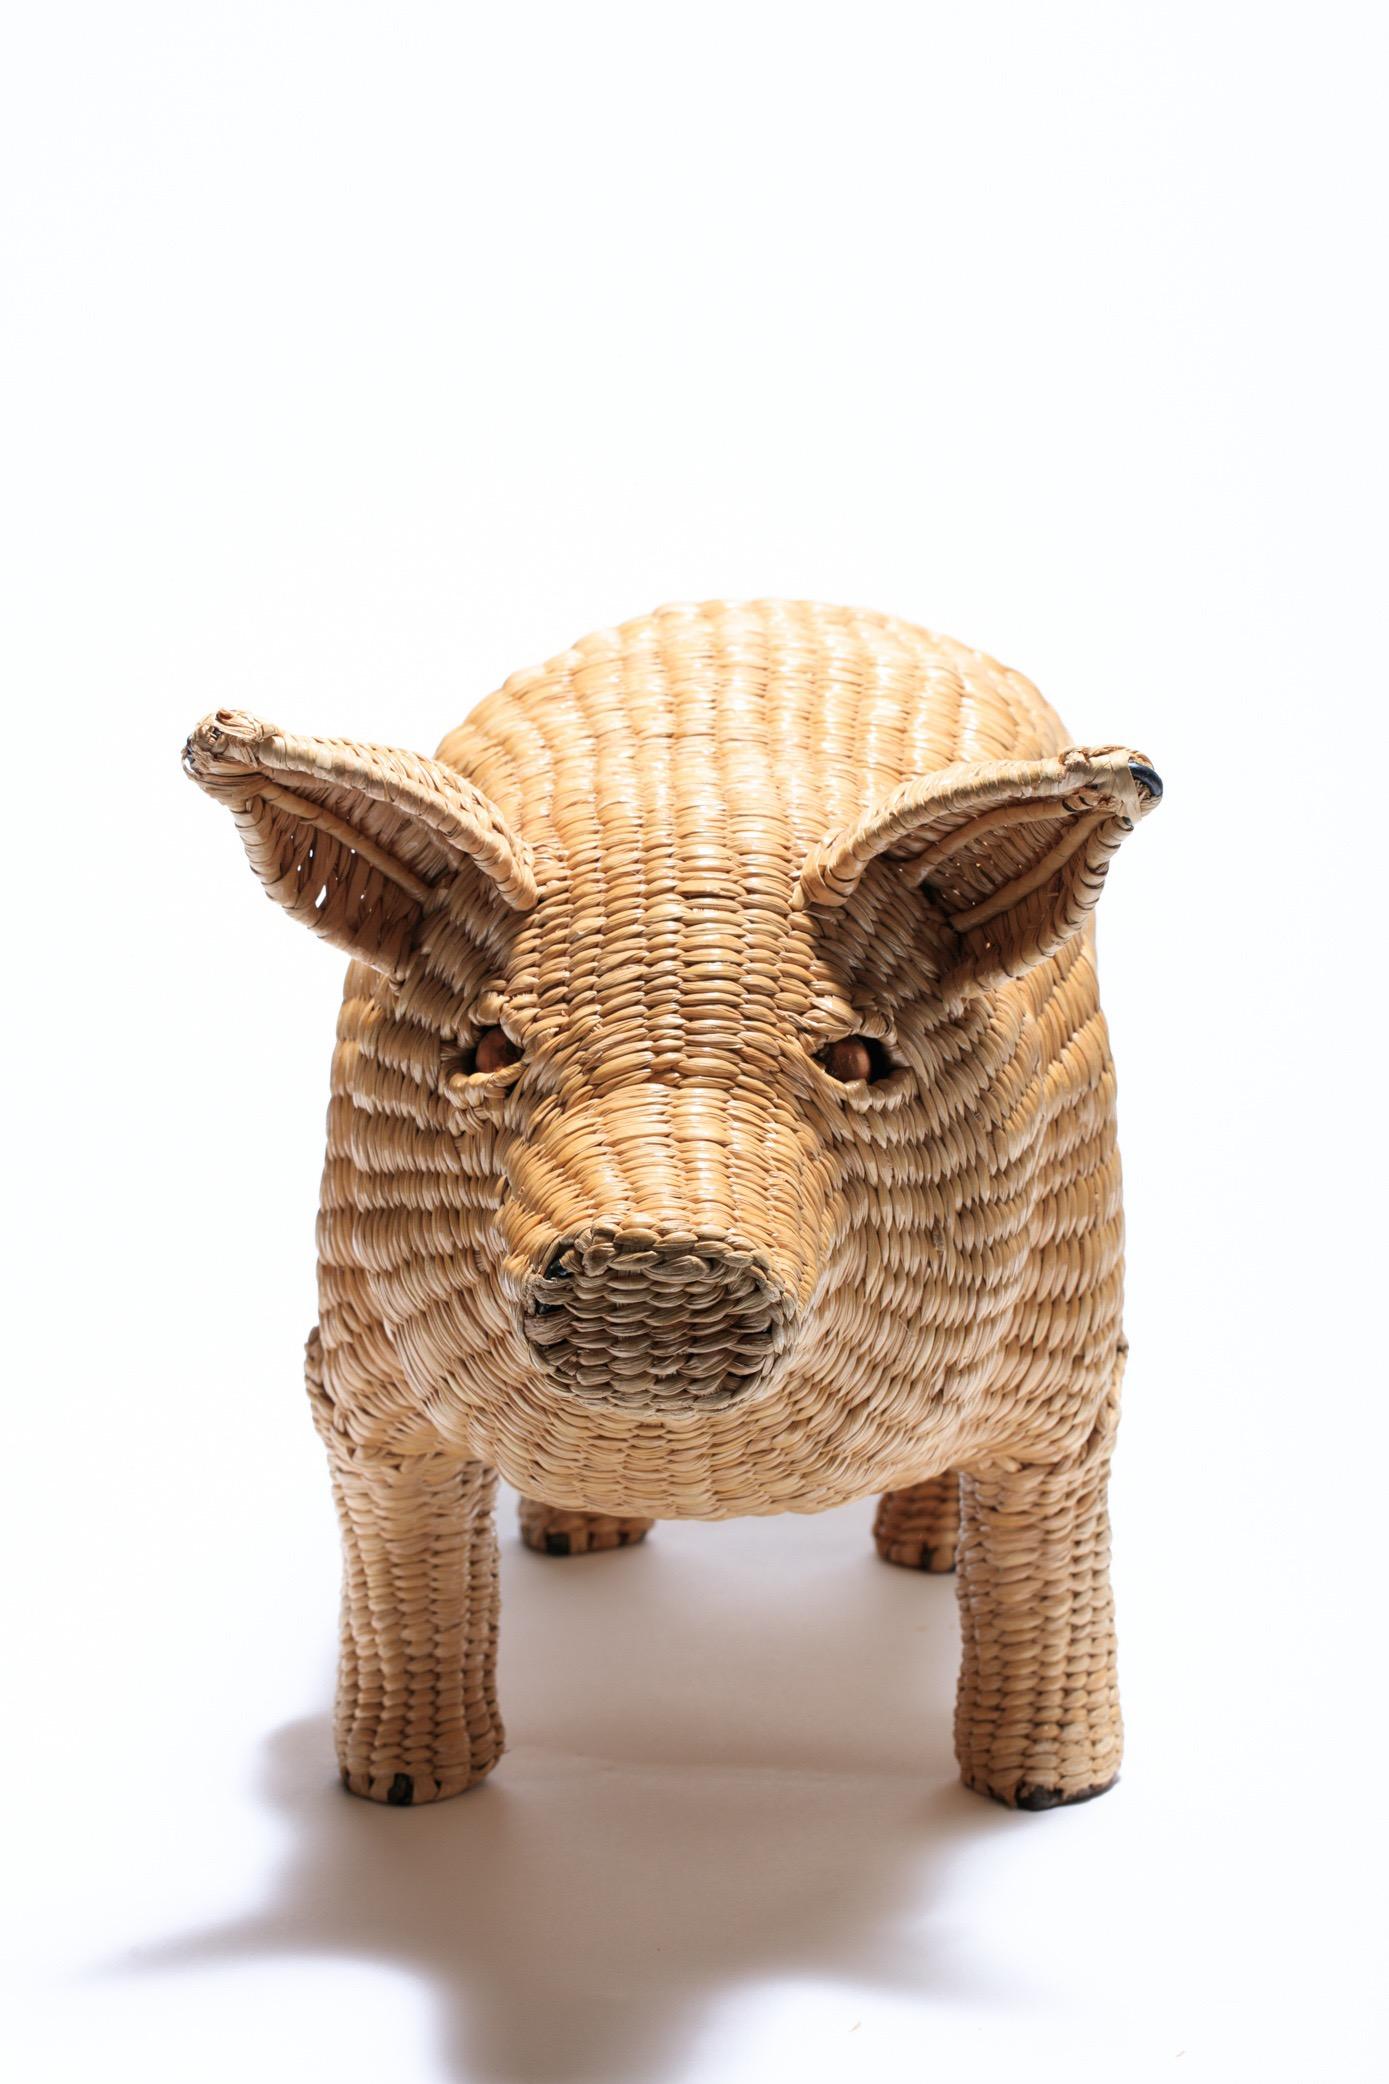 Fun Mario Lopez Torres wicker pig sculpture, Mexico 1970s. The pig features an iron frame with wicker woven over the frame and finished with copper eyes and an iron tail. Brass medallion on the underside includes the artist's name and reads 